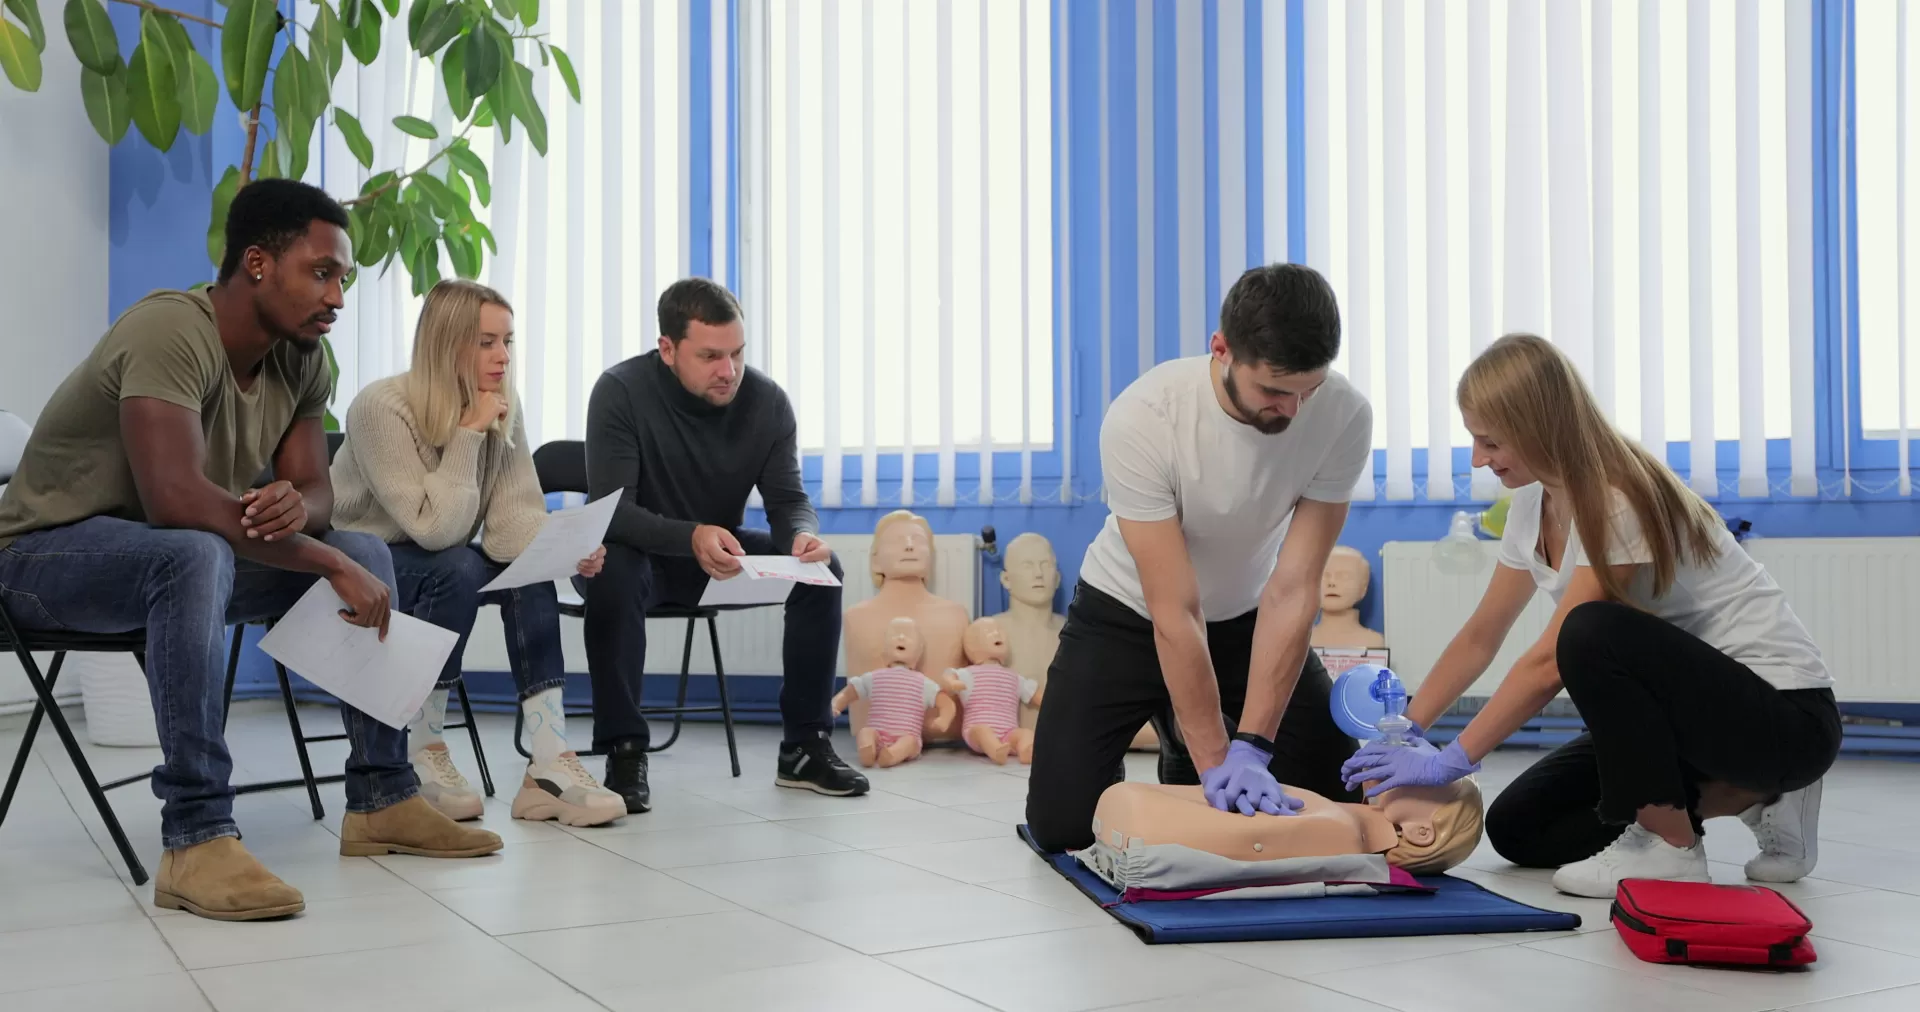 A man and woman demonstrating how to do CPR to others.